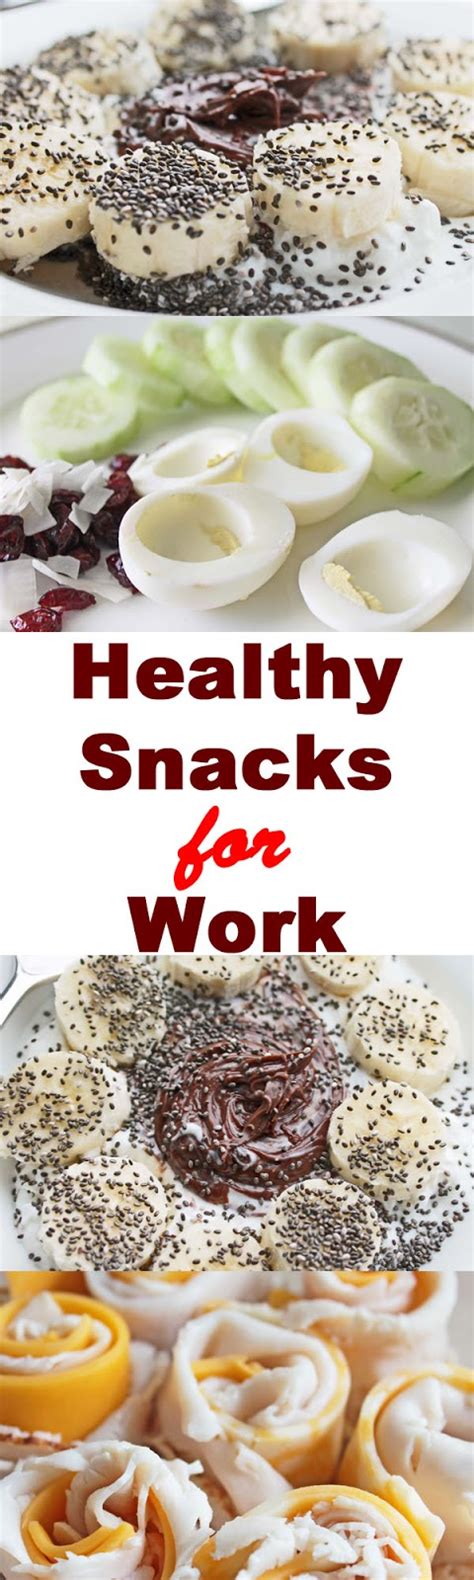 Healthy Snacks For Work Daily Recommendations 13